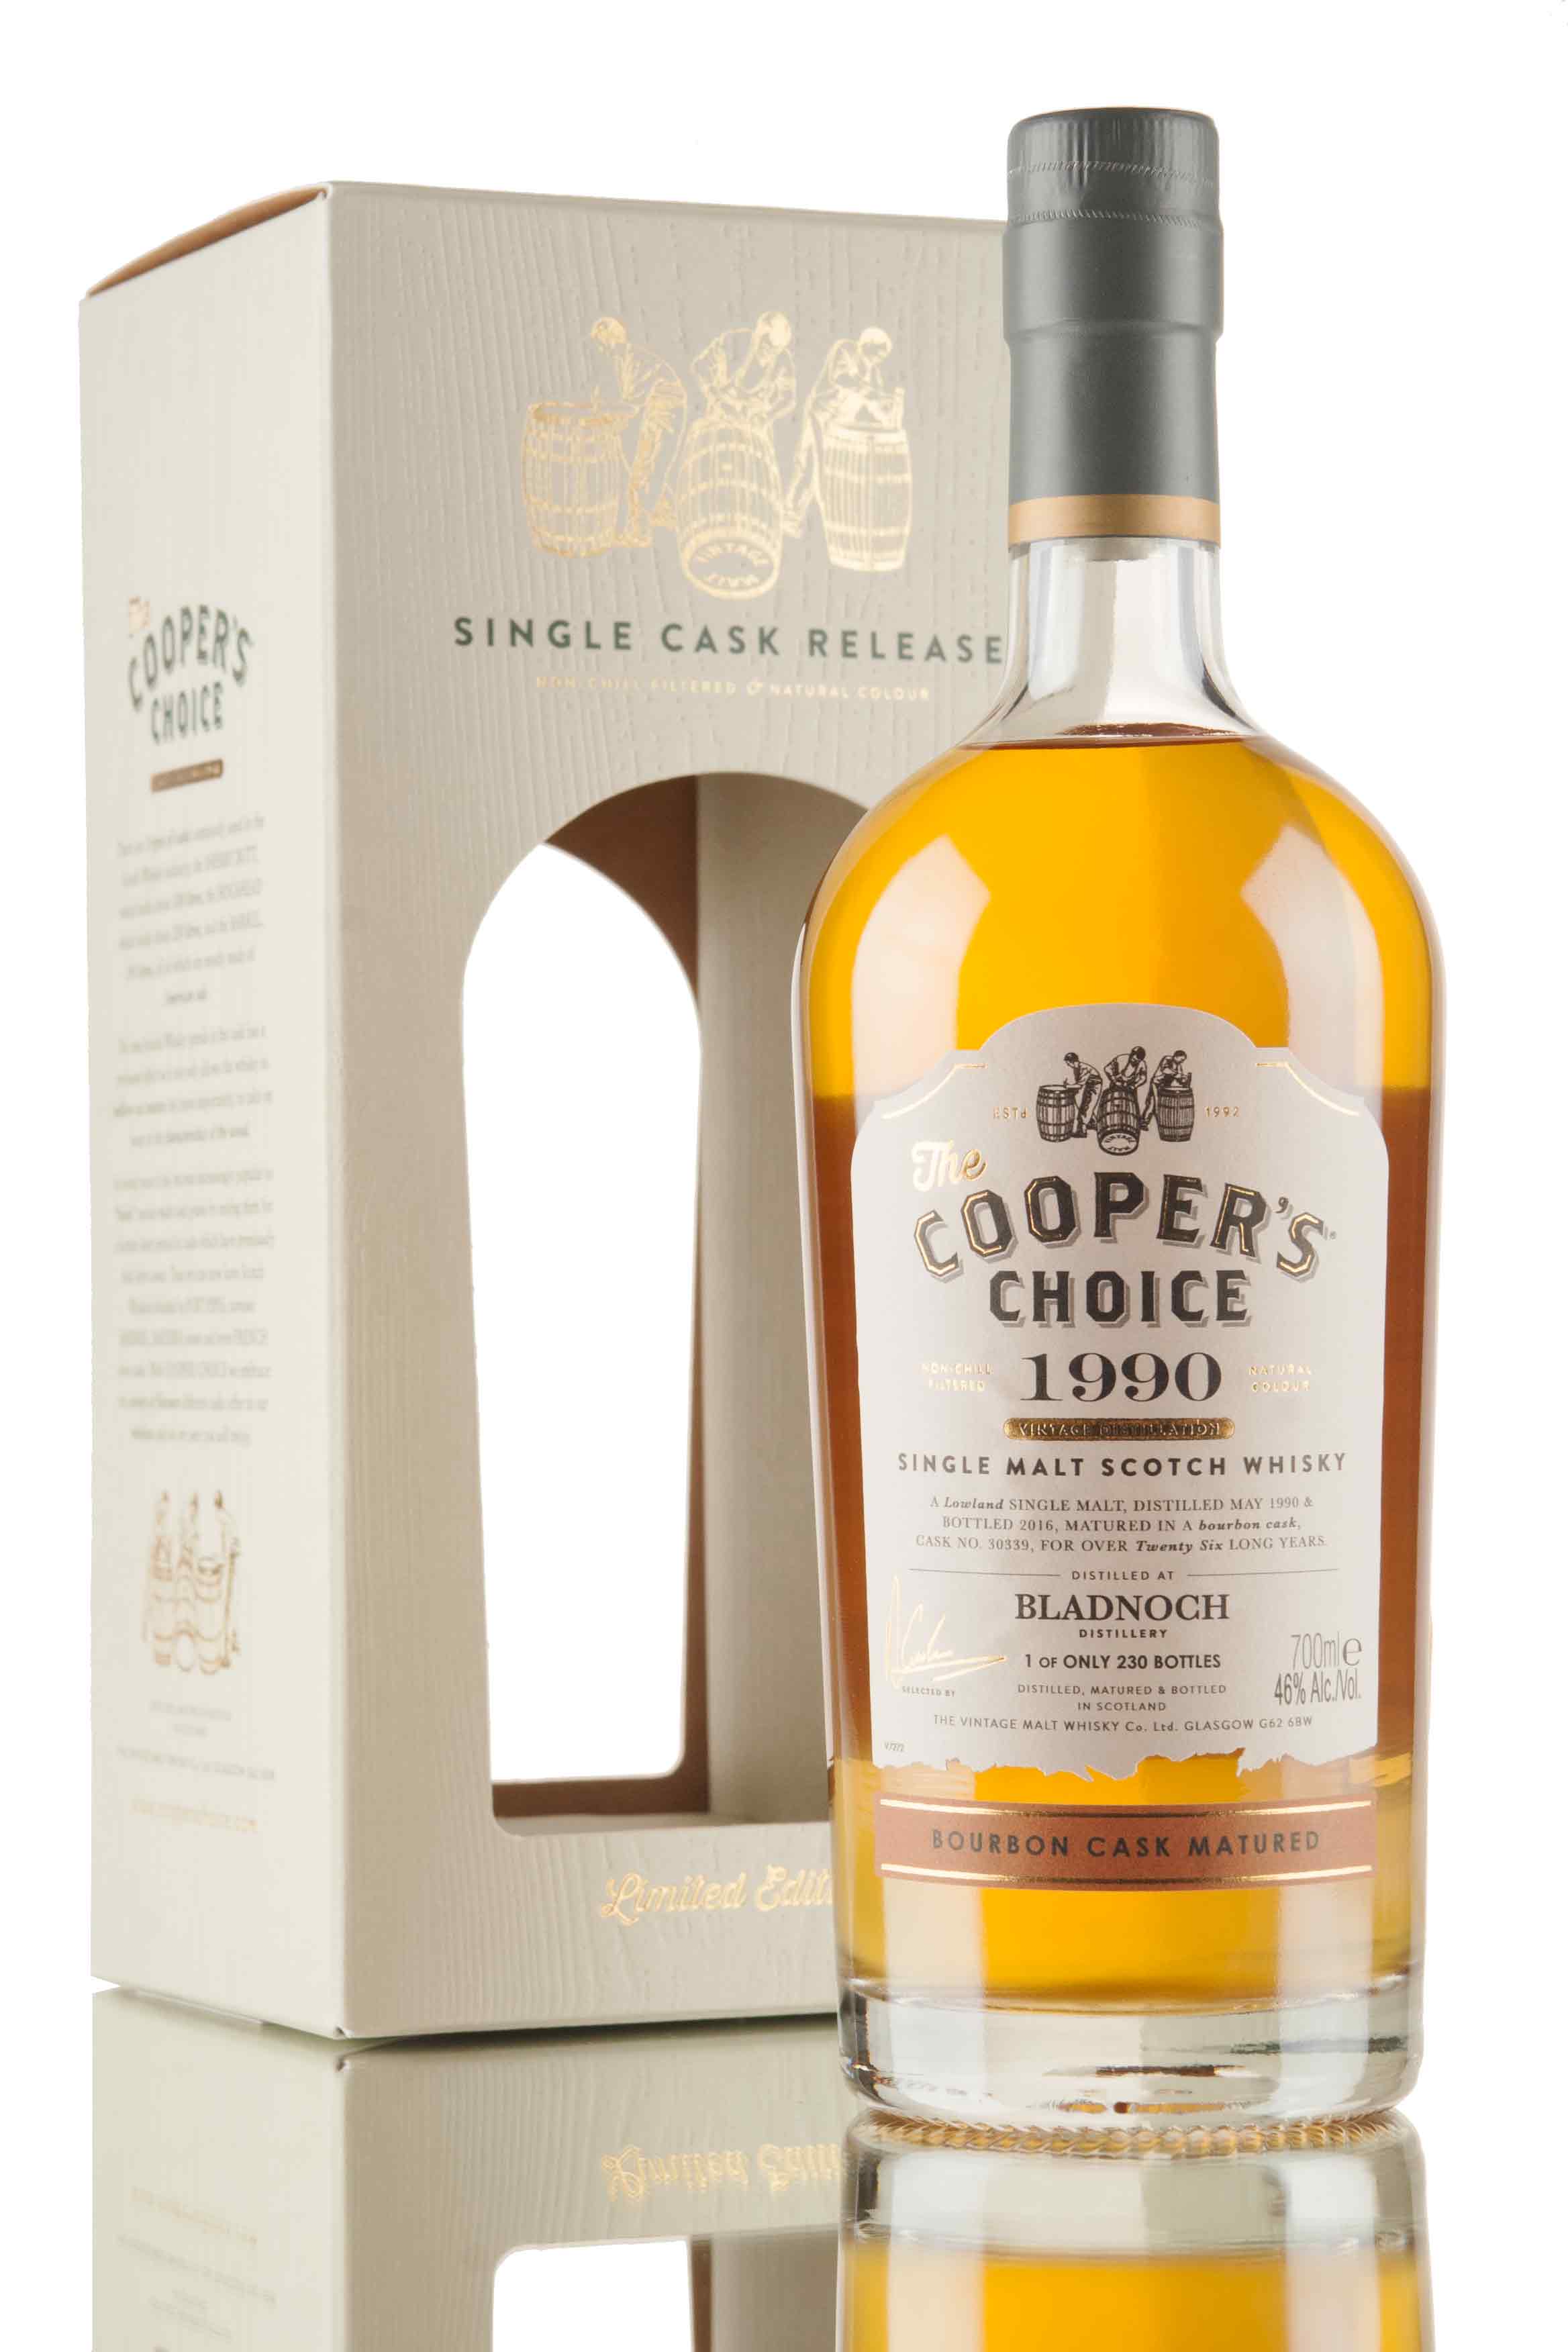 Bladnoch 26 Year Old - 1990 / Cask #30339 / Cooper's Choice